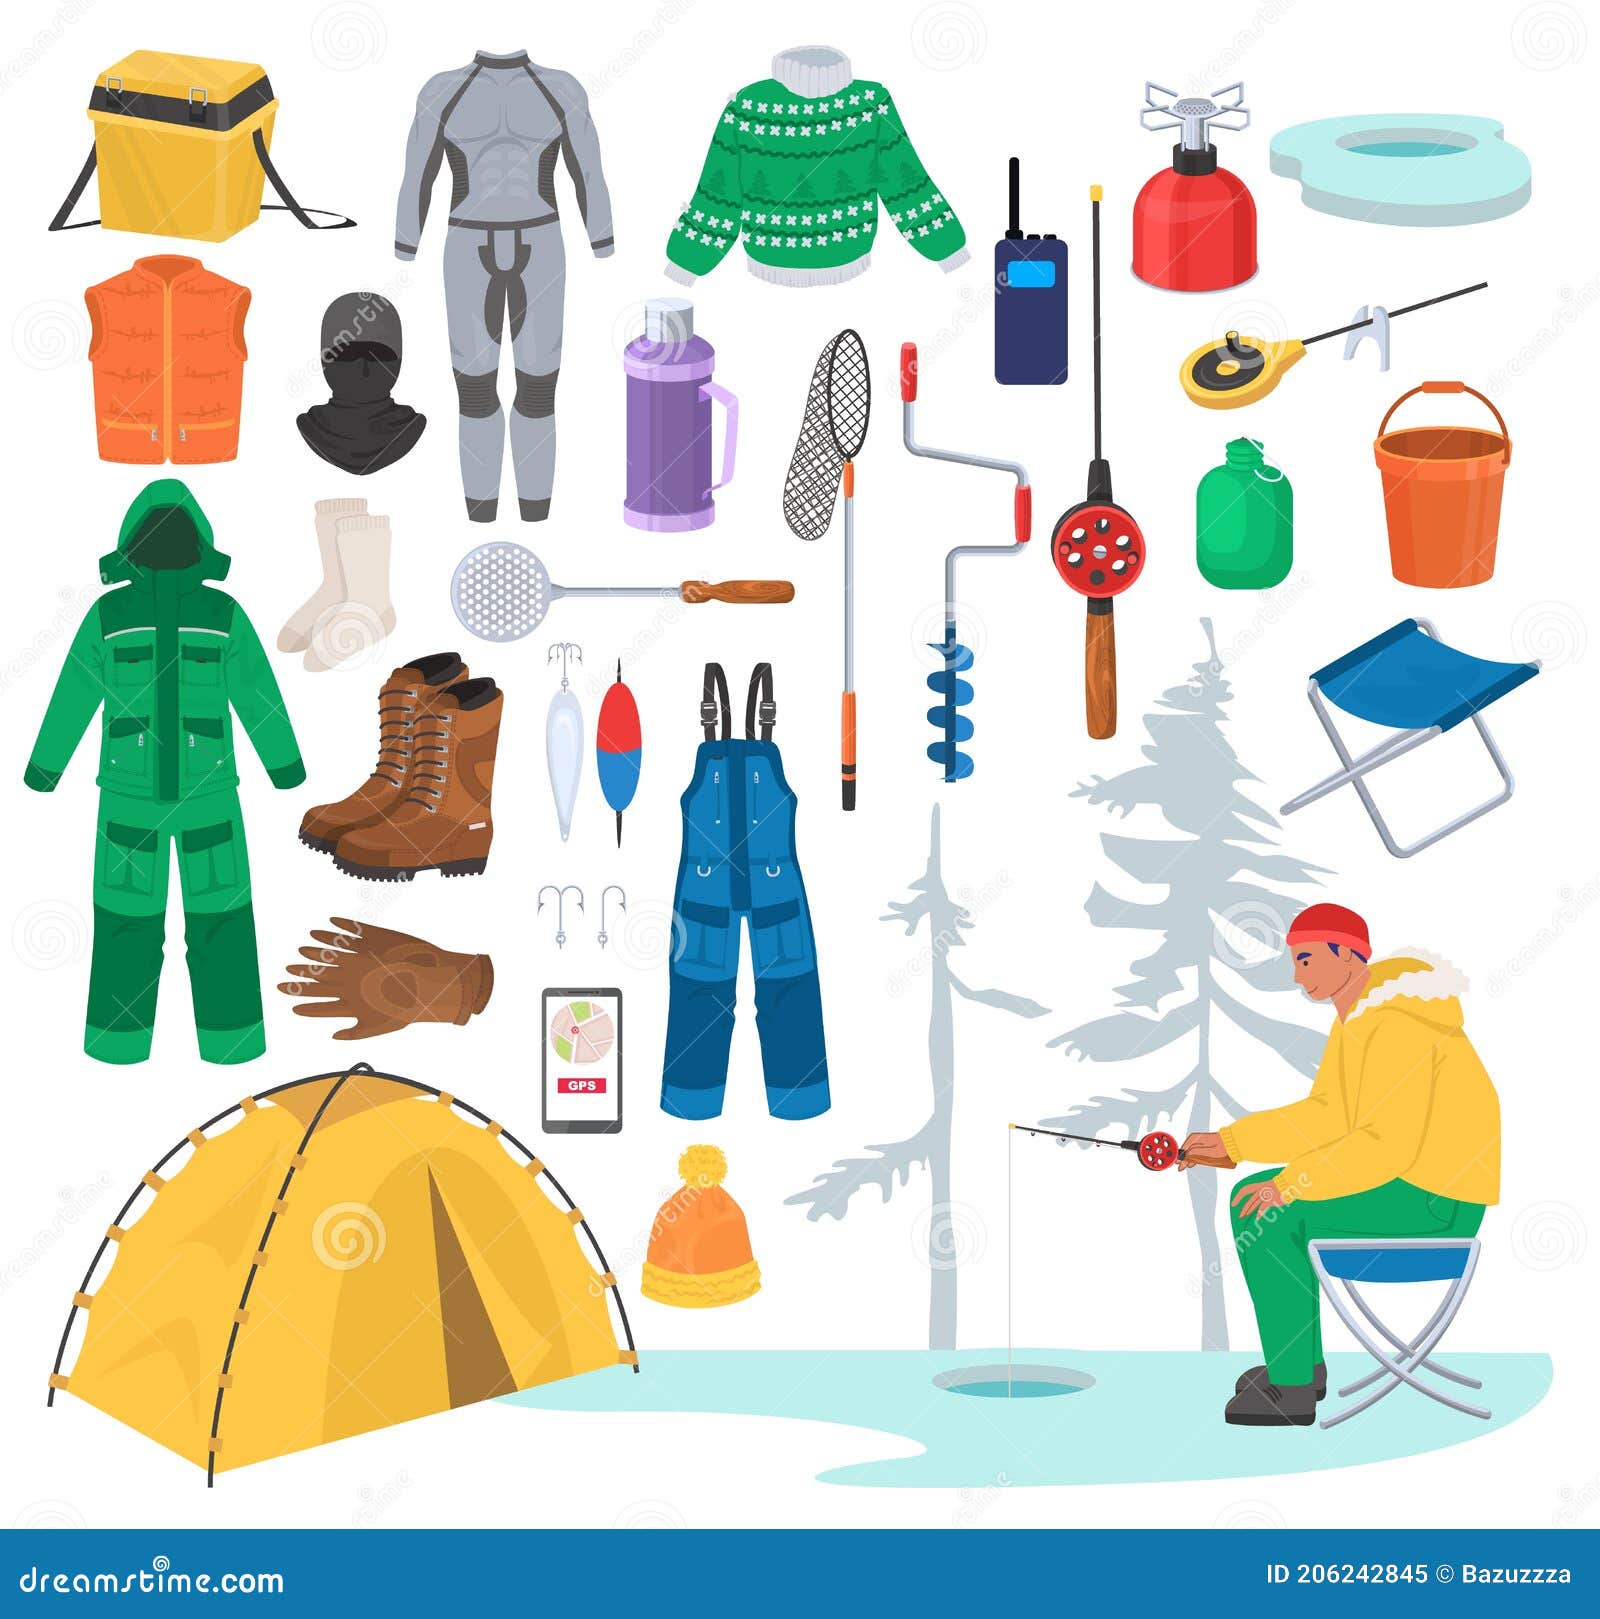 Ice Fishing Gear. Equipment for Winter Fishing, Flat Vector Illustration.  Warm Clothes, Fisherman Tackle and Accessories Stock Vector - Illustration  of icon, apparel: 206242845